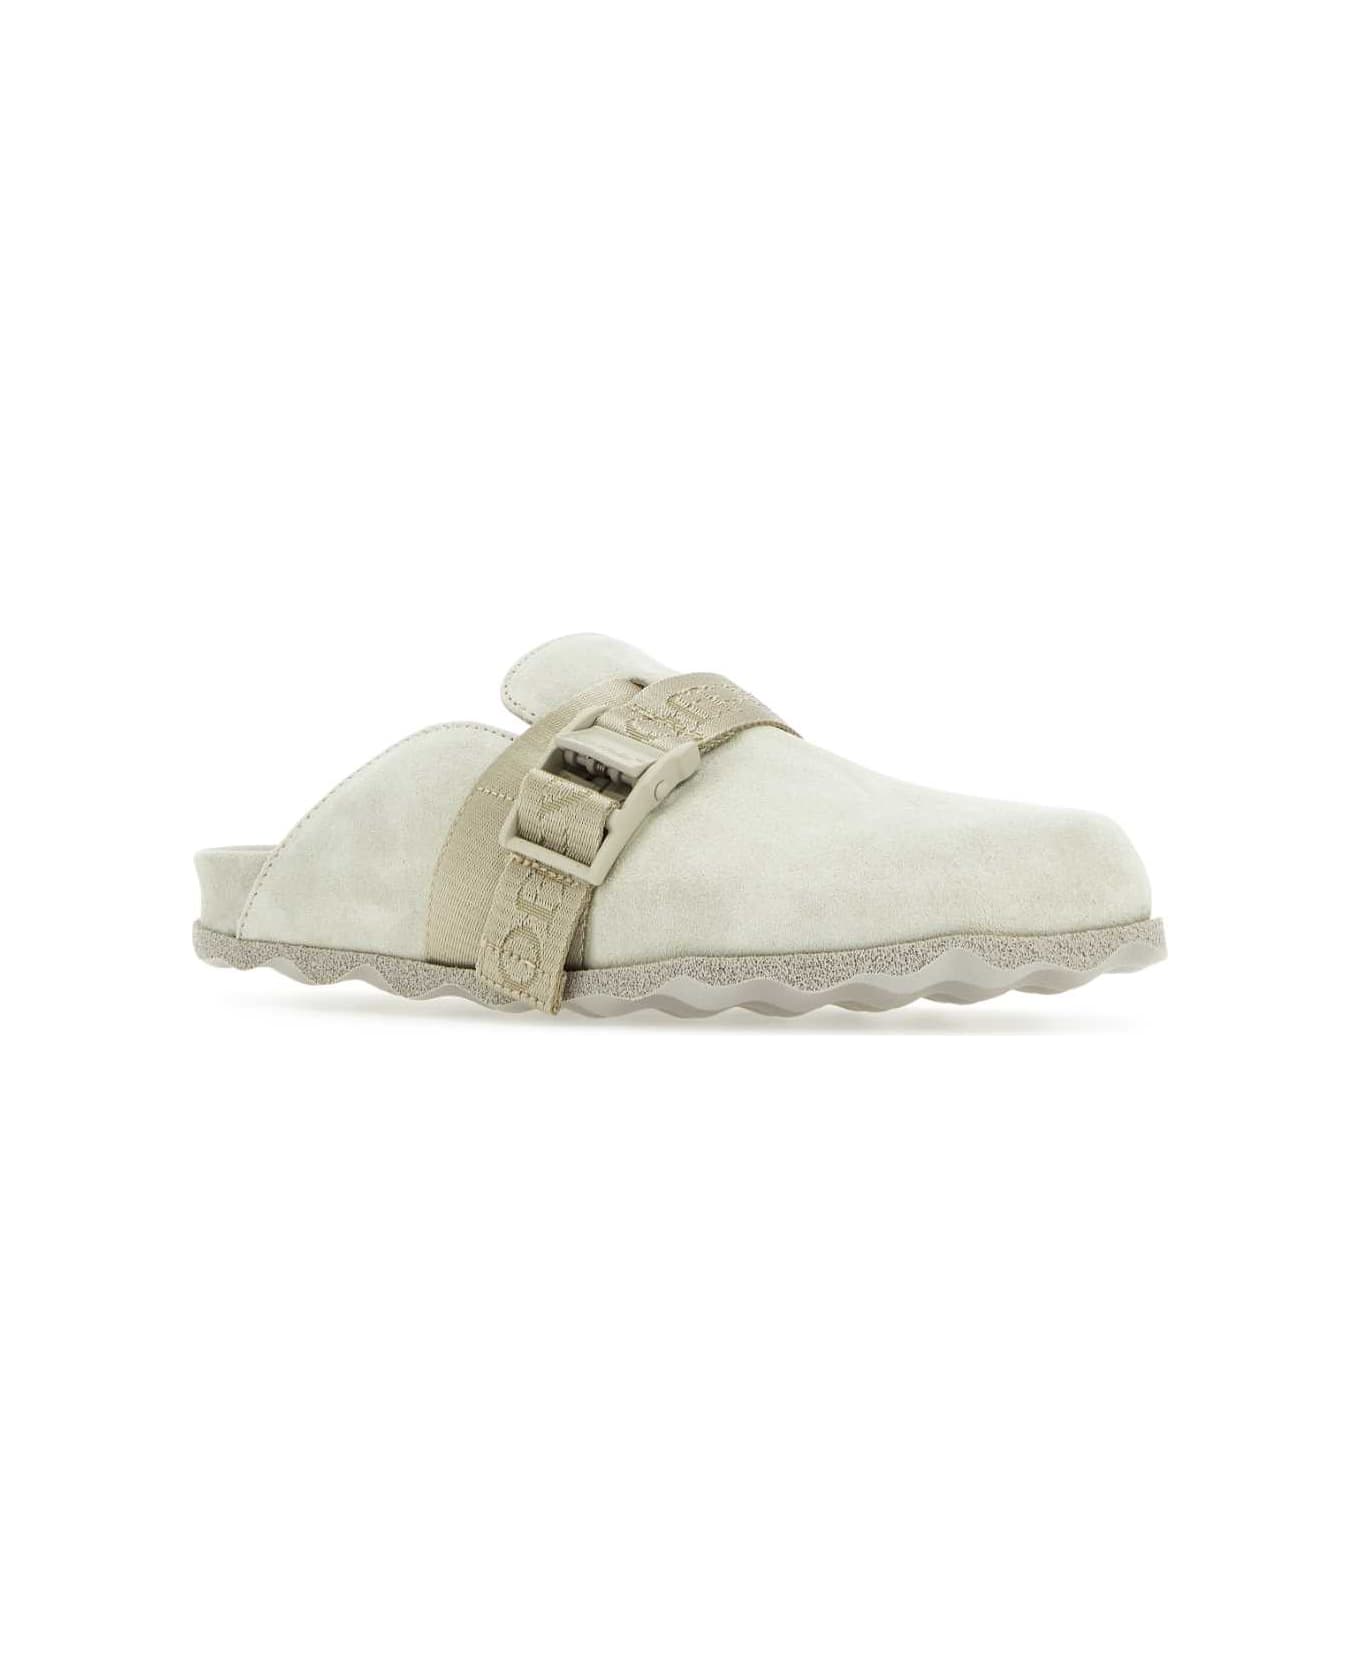 Off-White Suede Slippers - OFFWHITE サンダル